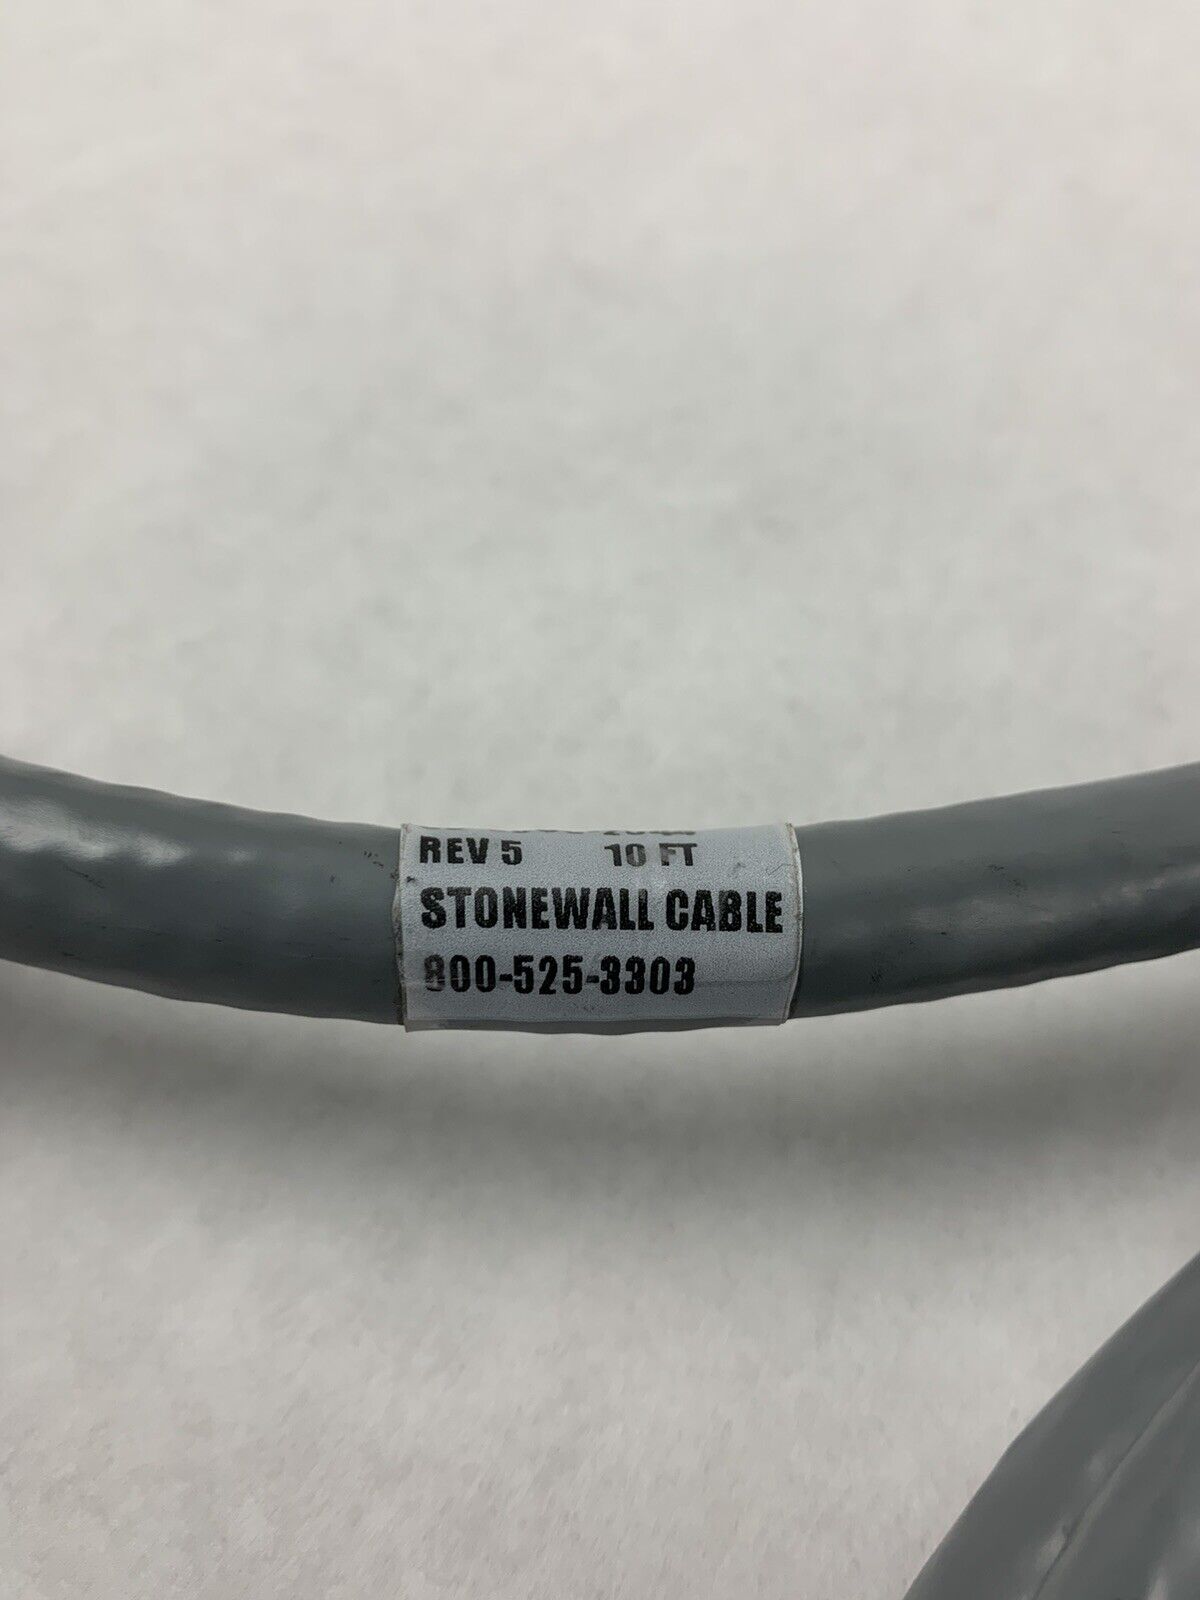 RJ21 Telco CAT 5e Cable 50-Pin Male and Female SC-3068-2044-10FT 800-525-3303